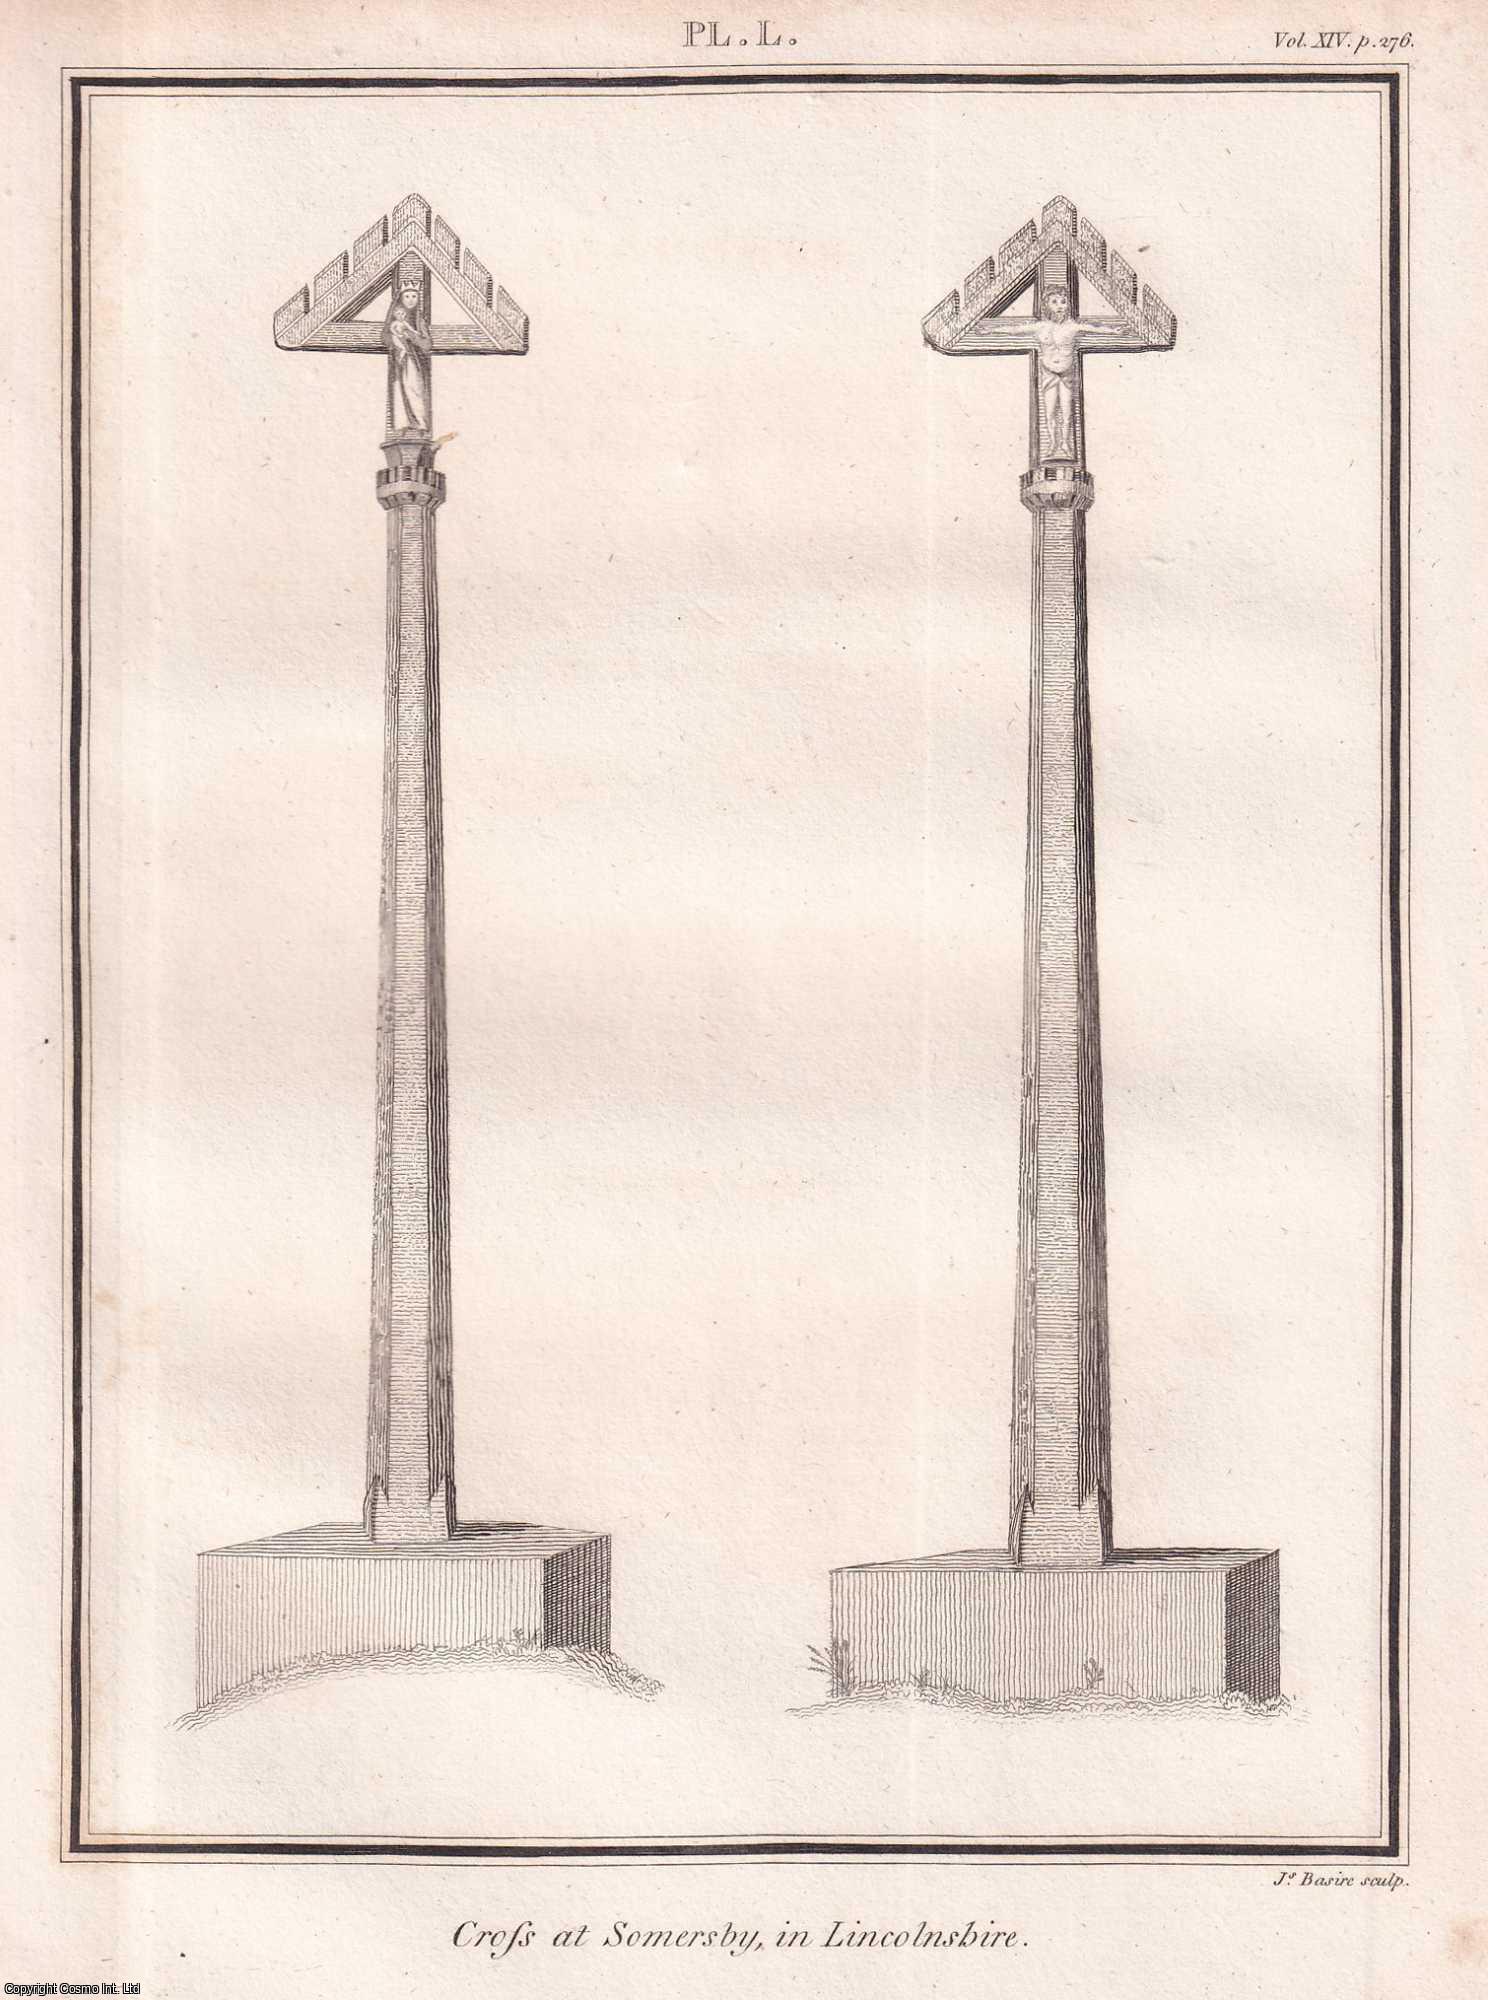 ST MARGARET CHURCH, SOMERSBY - Cross at Somersby, in Lincolnshire. A Perpendicular cross which survived being destroyed by the Roundheads following the battle of Winceby. A rare original engraving from the journal Archaeologia, 1801.